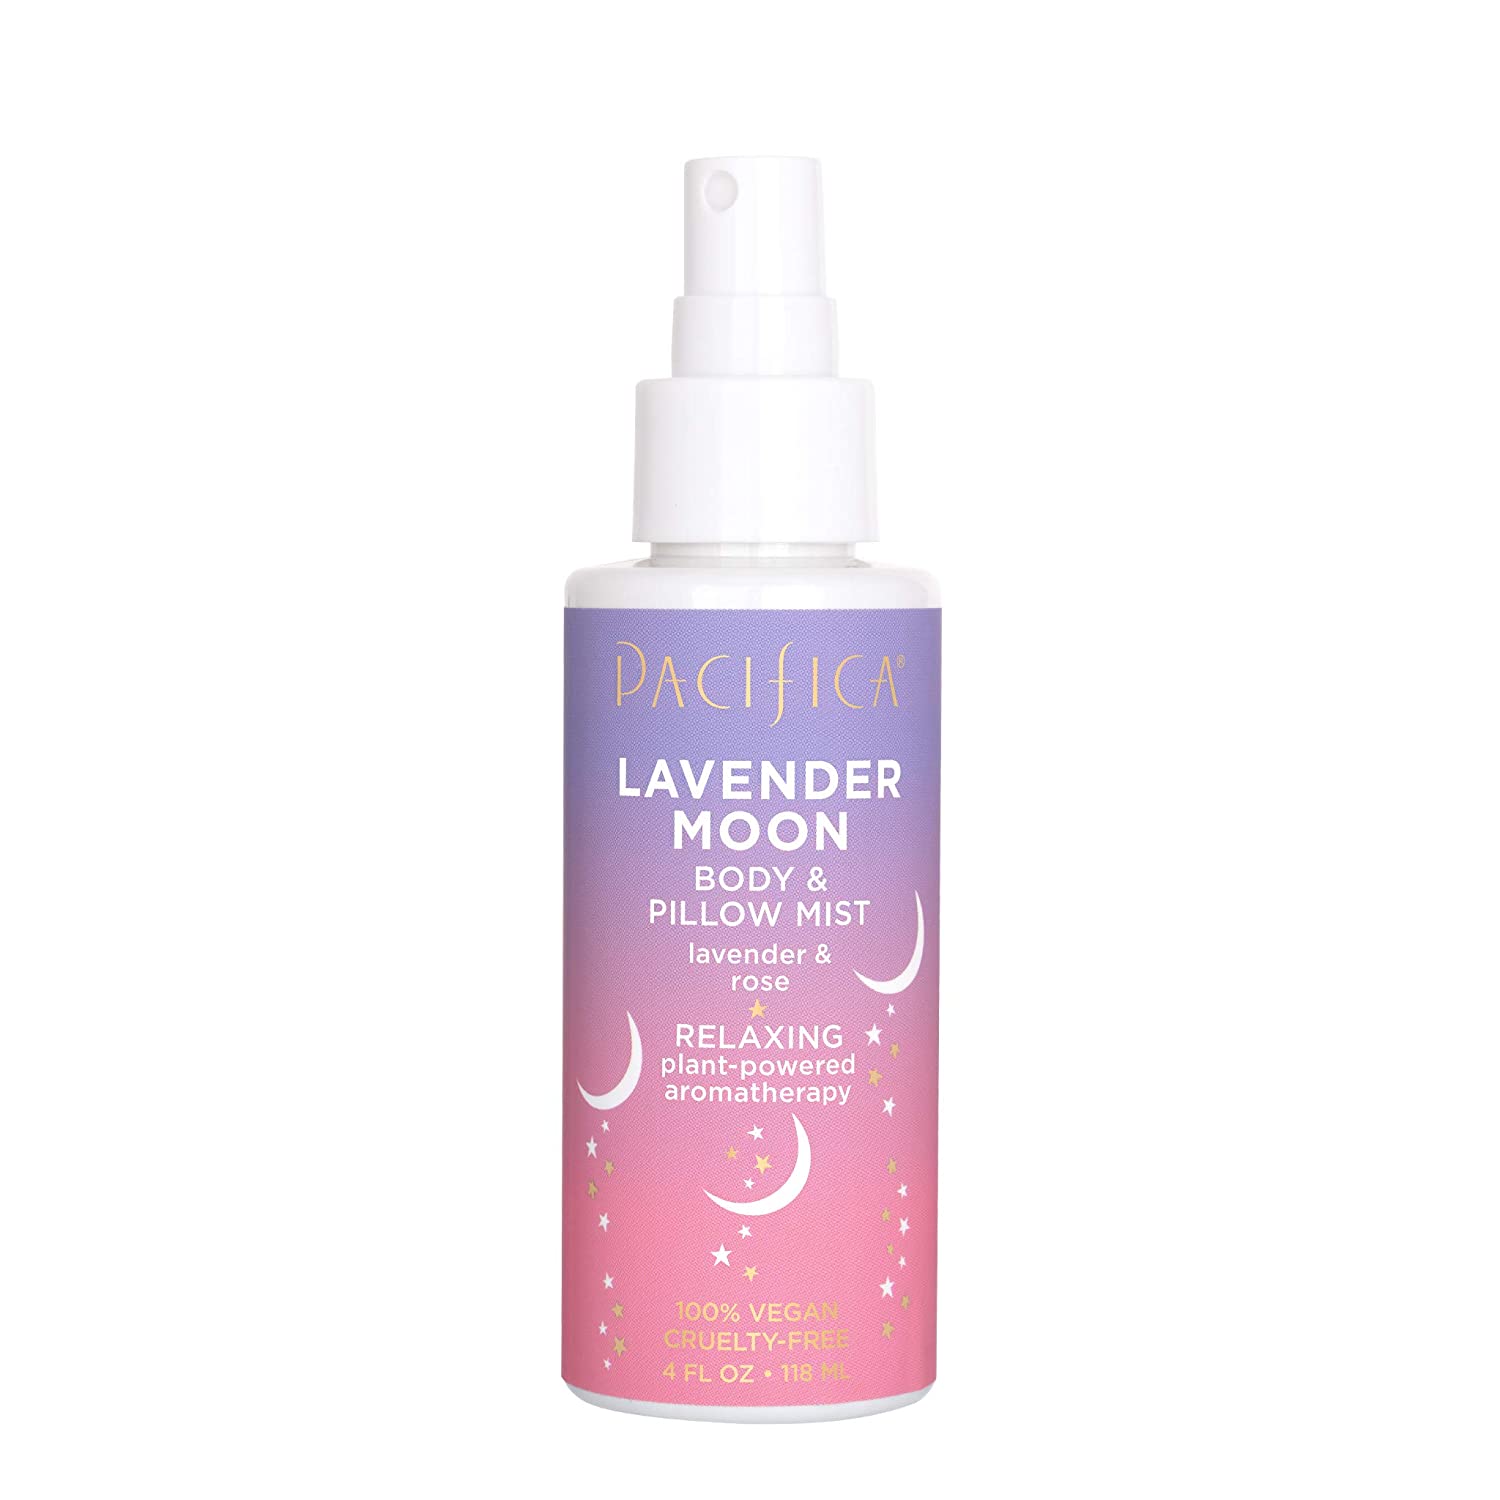 Pacifica Body and Pillow Mist - Lavender Moon